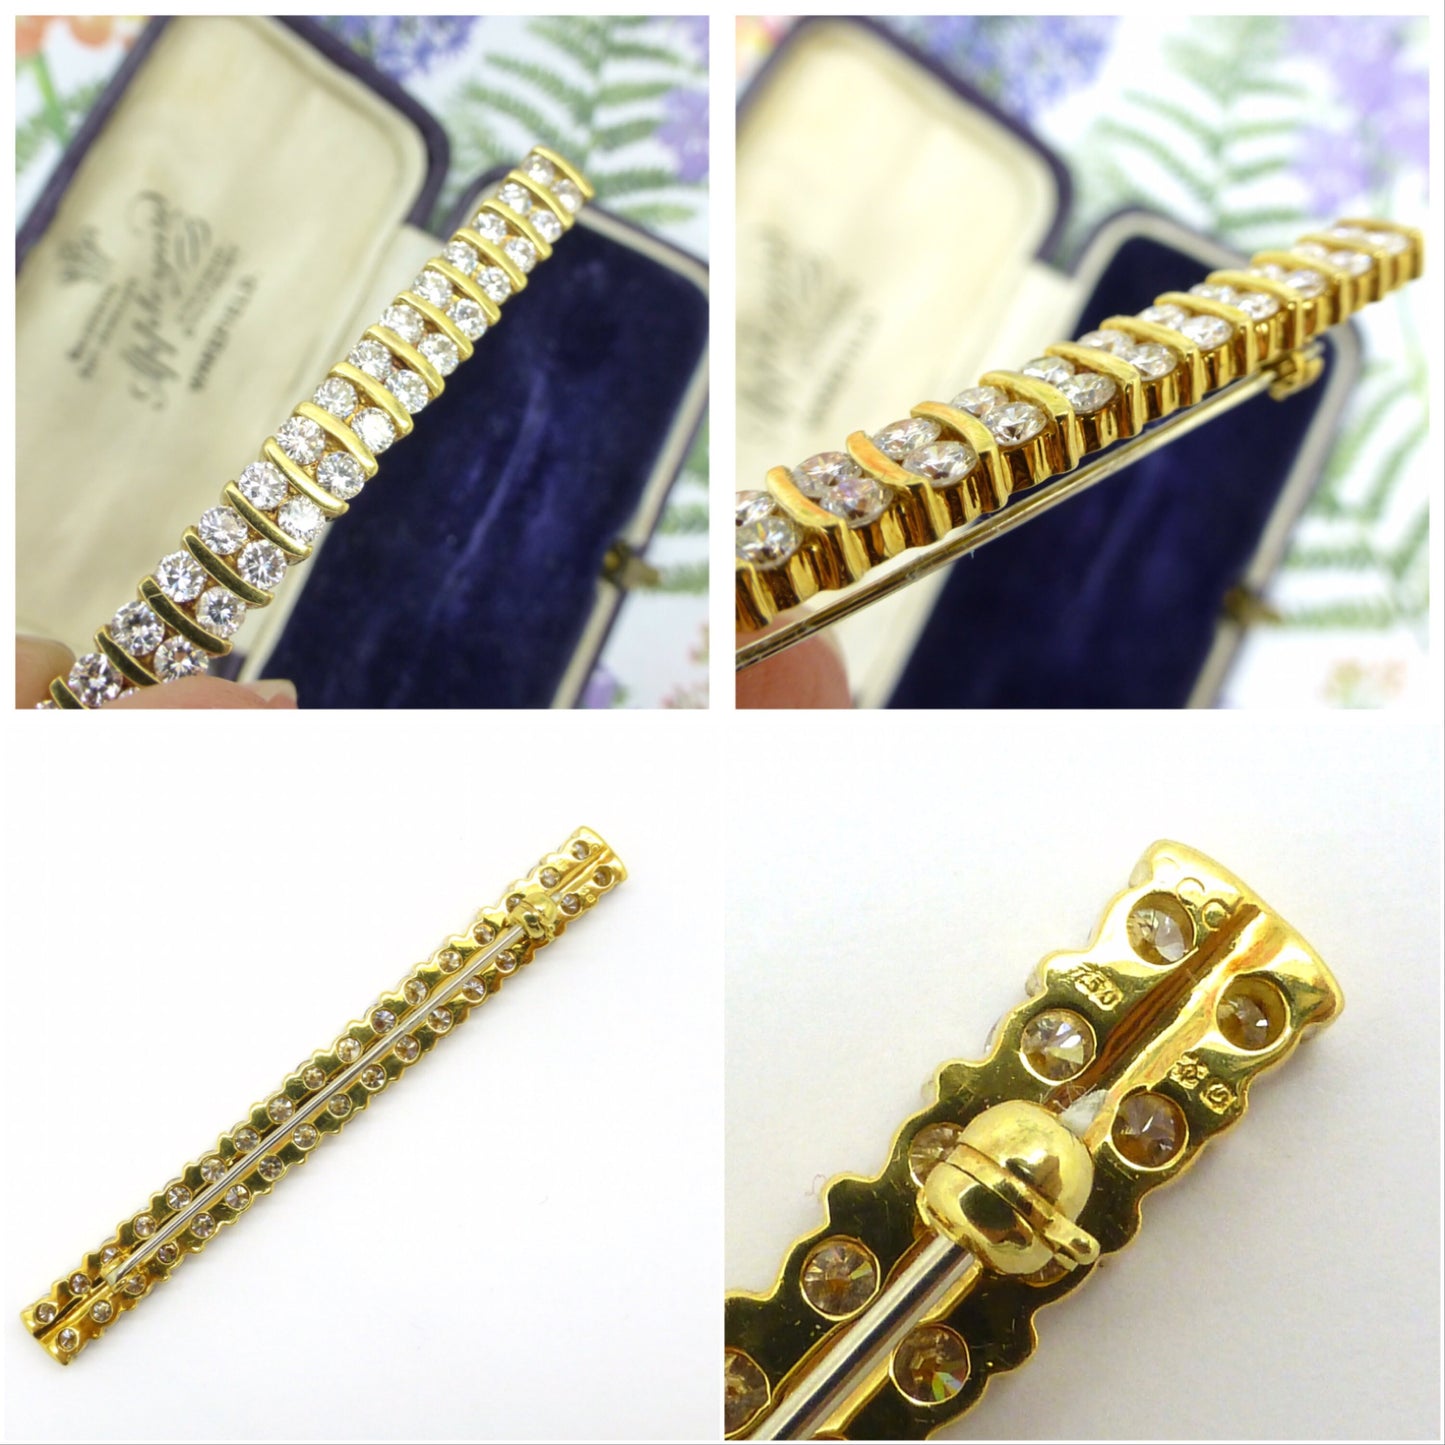 Stunning vintage diamond double row bar brooch 2.5 carat ~ With Independent appraisal/valuation